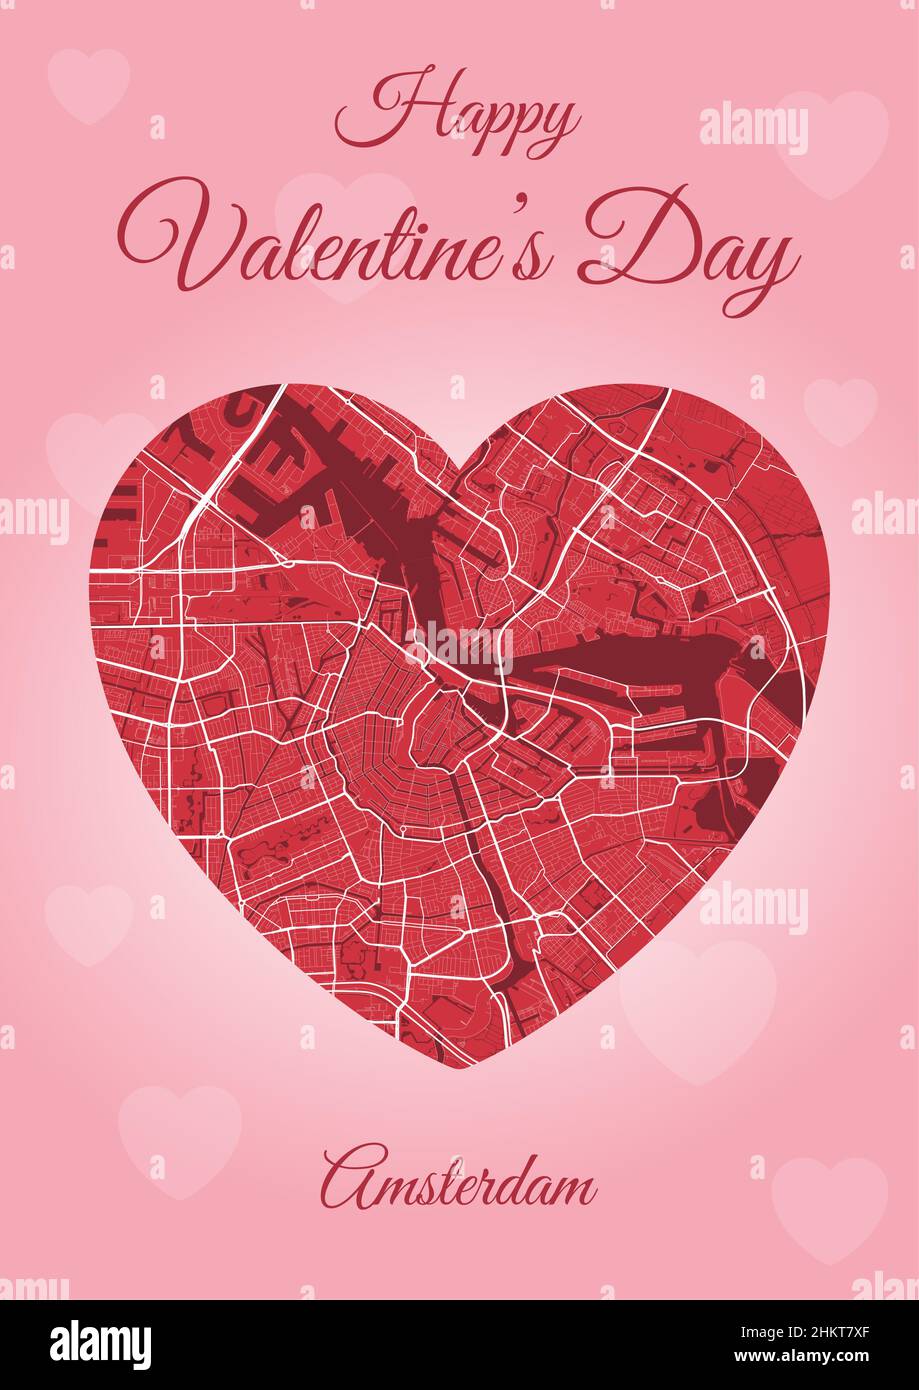 Happy Valentine's day holiday card with Amsterdam map in heart shape. Vertical A4 Pink and red color vector illustration. Love city travel cityscape. Stock Vector